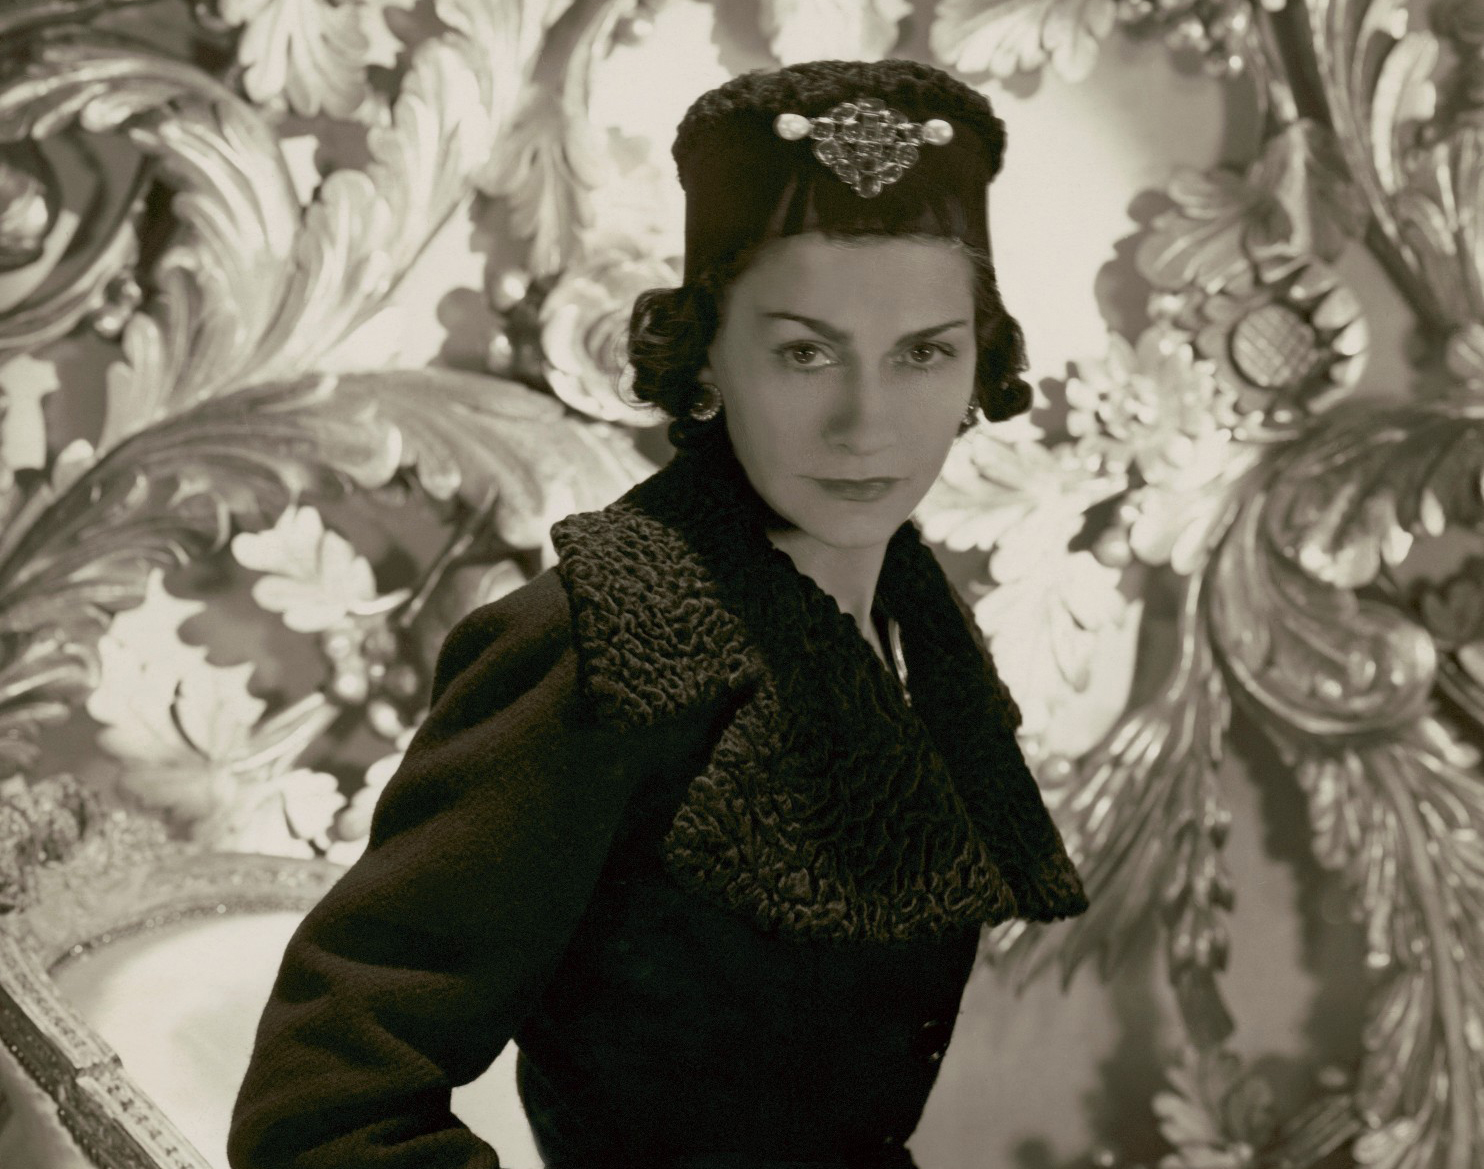 Coco Chanel: The Legend And The Life – CELLOPHANELAND*